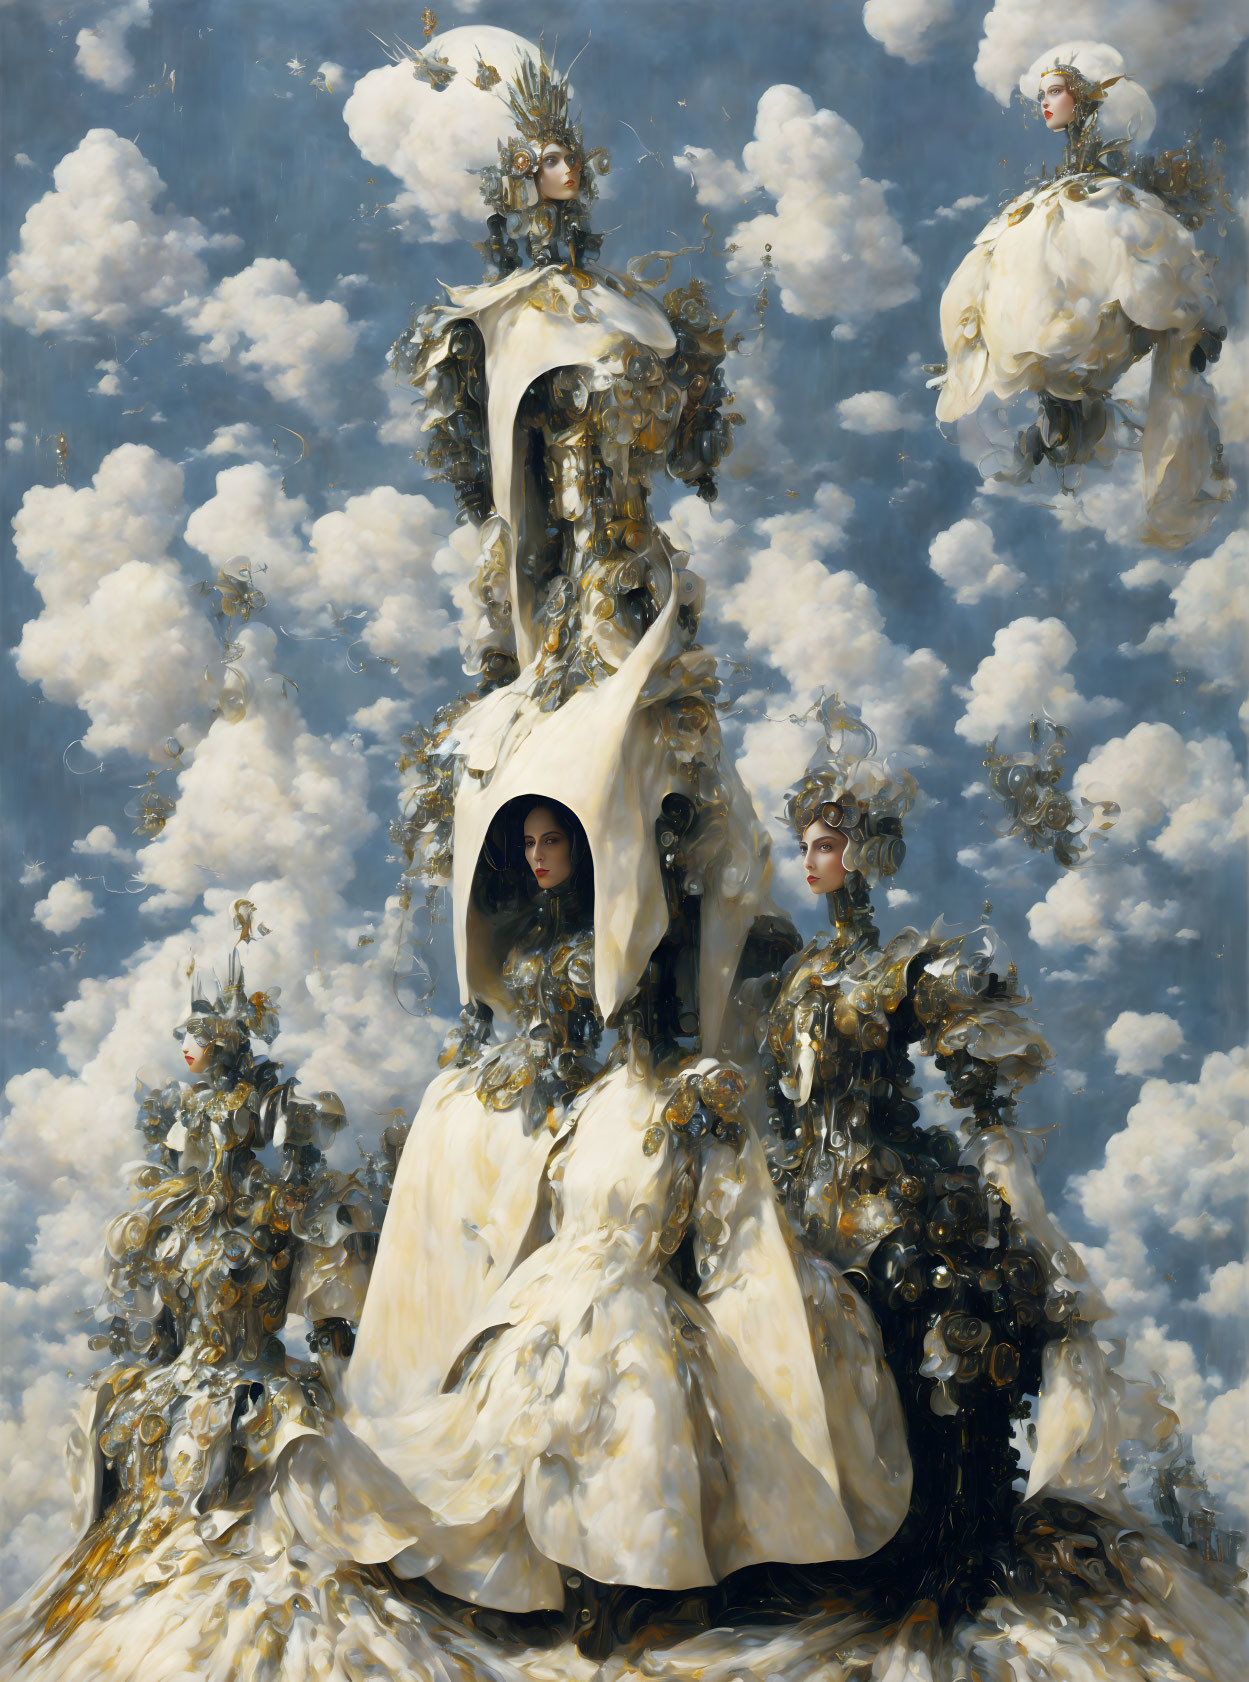 Surreal painting with three figures in ornate gowns blending architecture and sky.